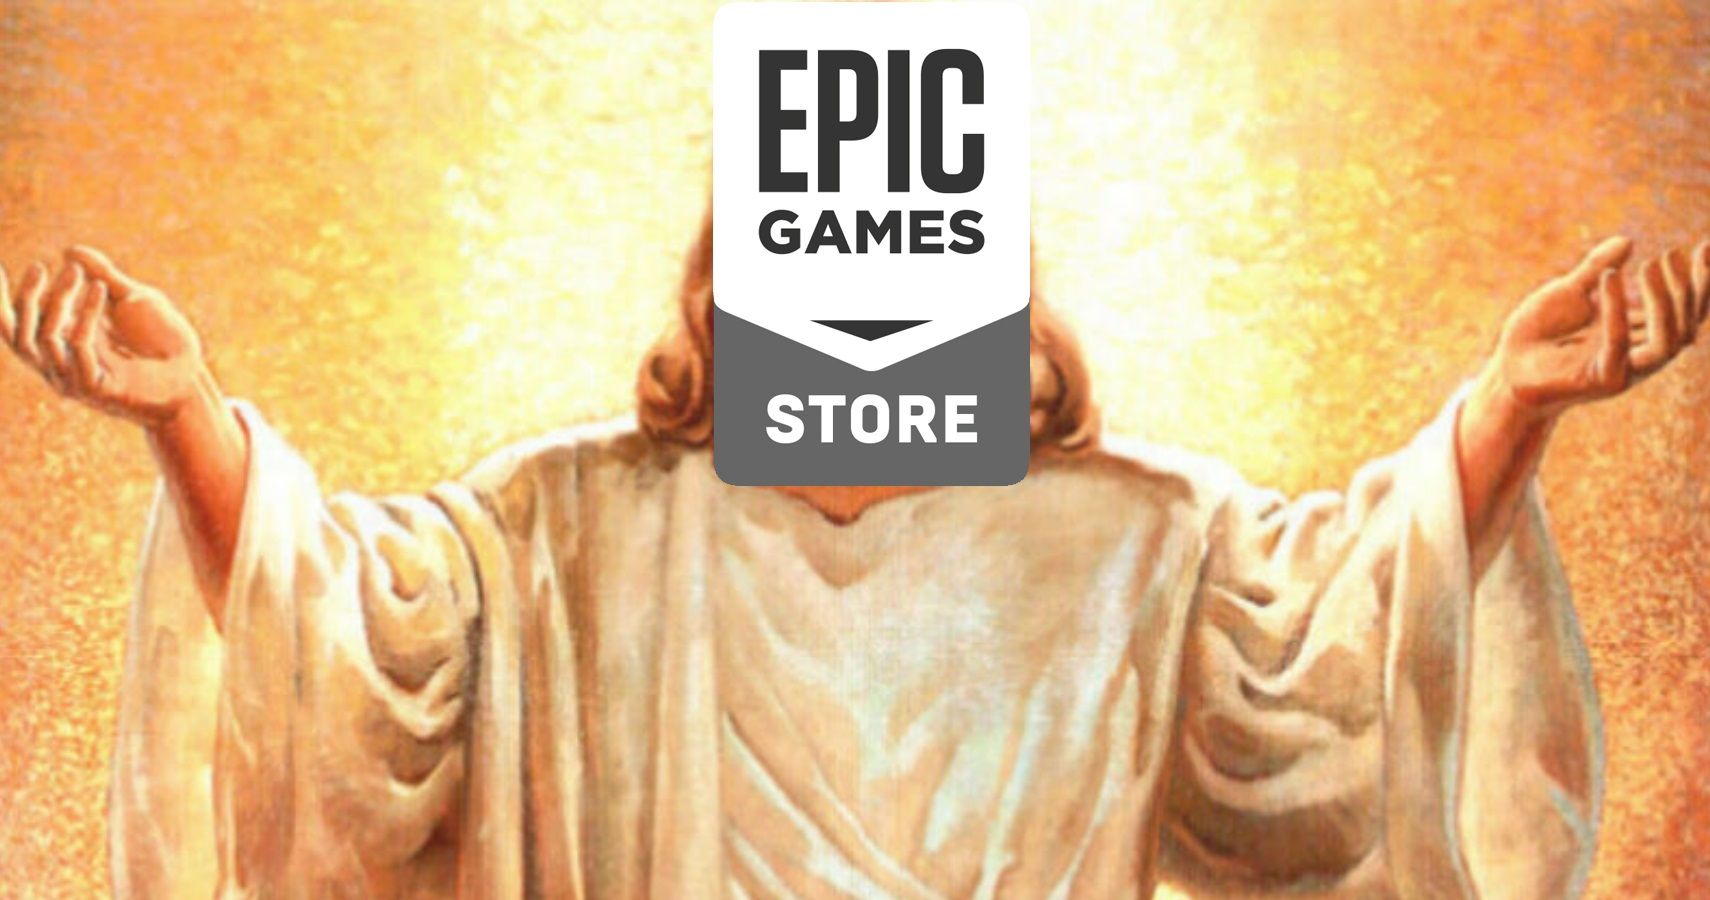 Epic's weekly free games will continue through 2020